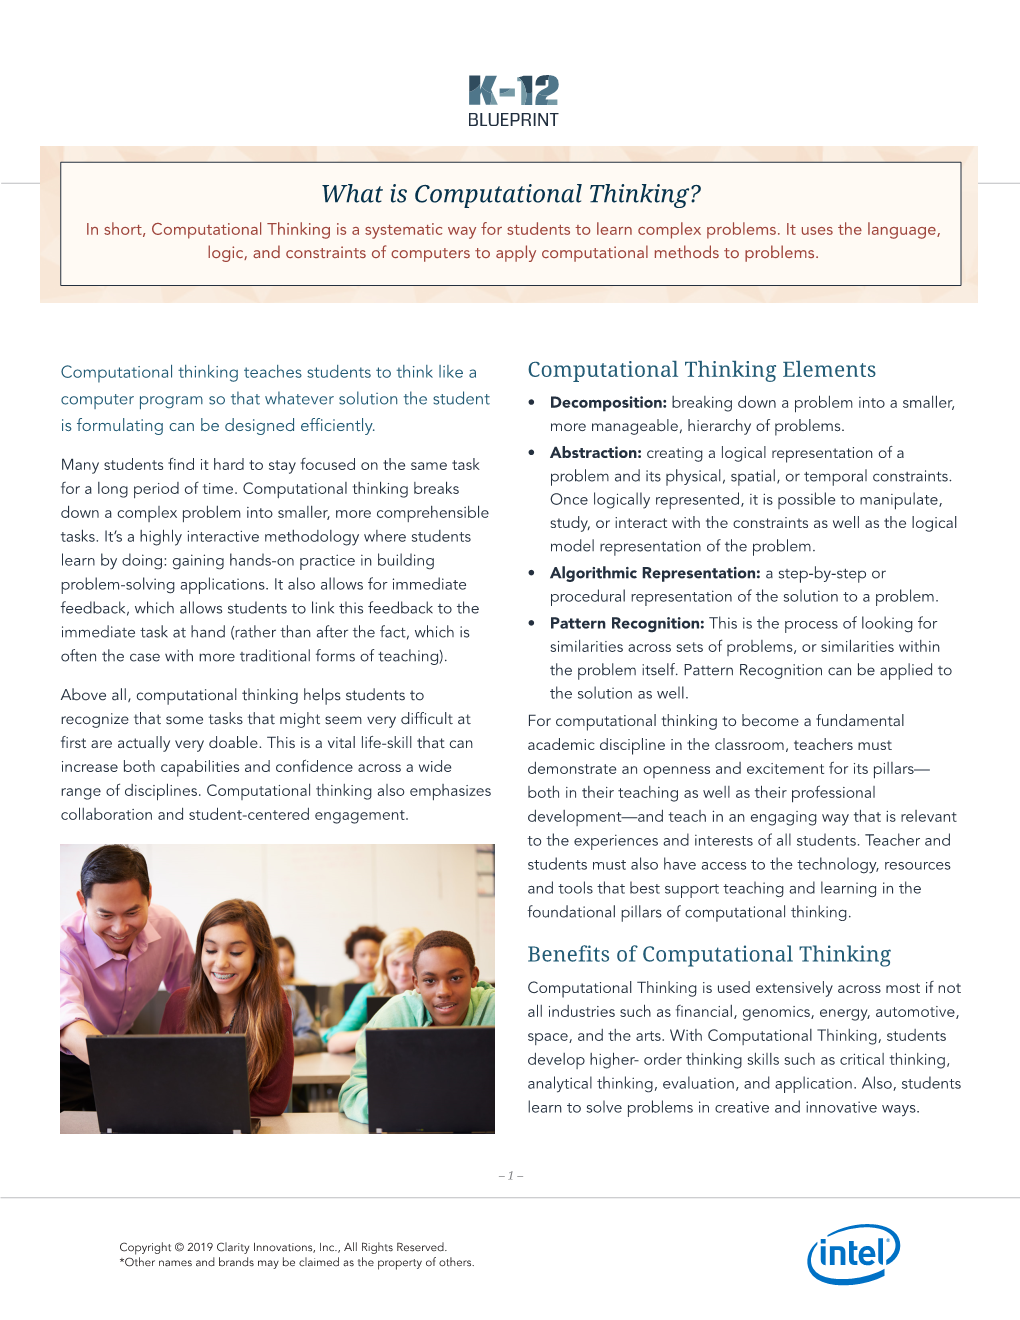 What Is Computational Thinking? in Short, Computational Thinking Is a Systematic Way for Students to Learn Complex Problems